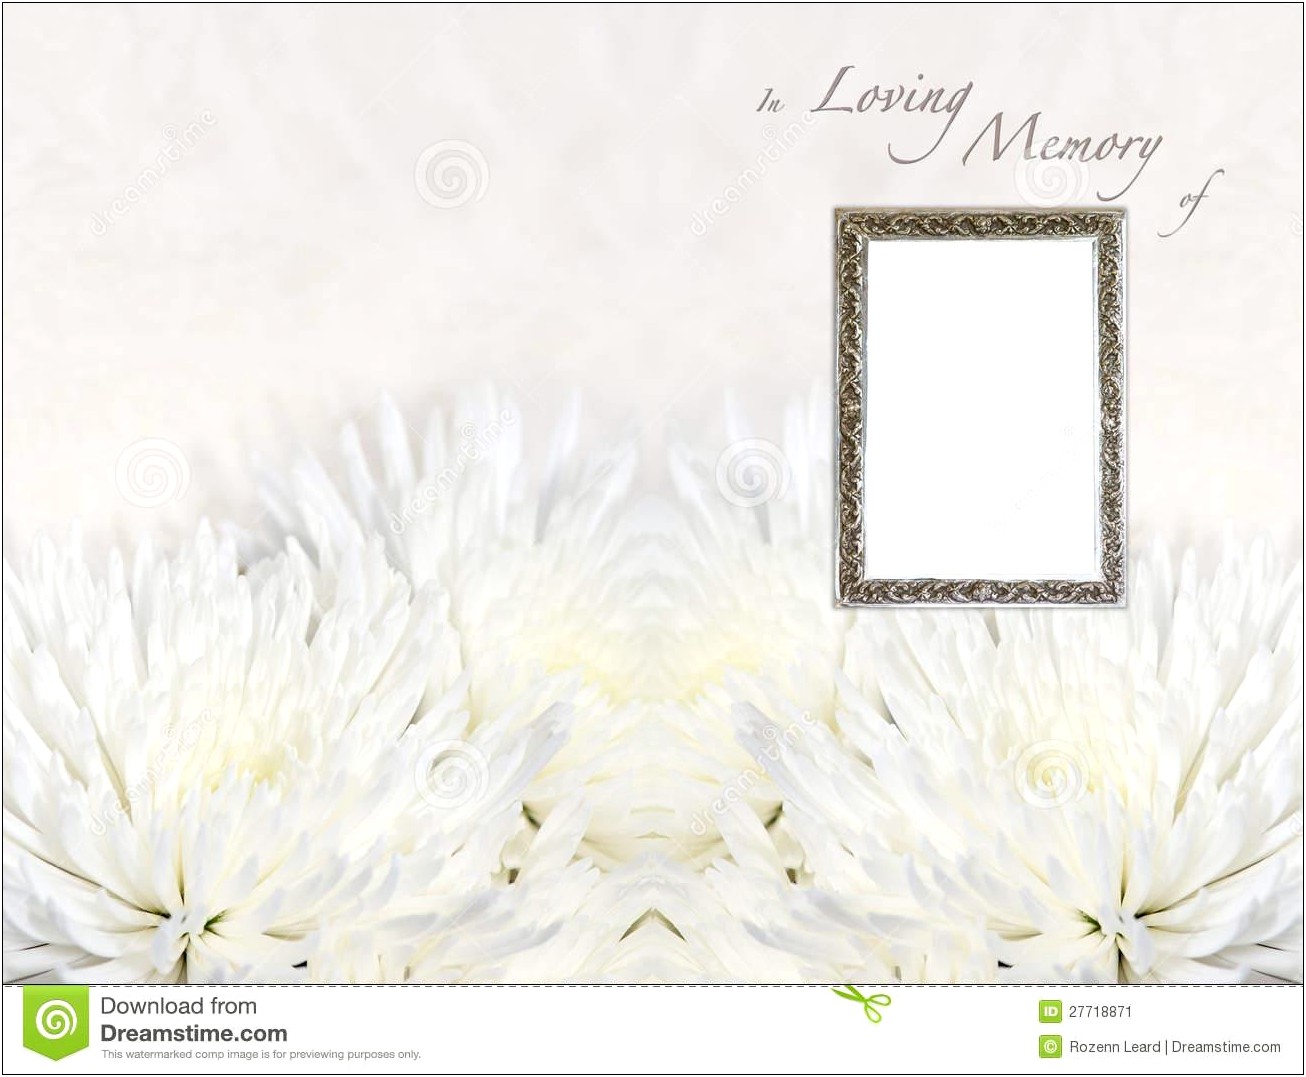 Free Guest Book Templates For Funeral